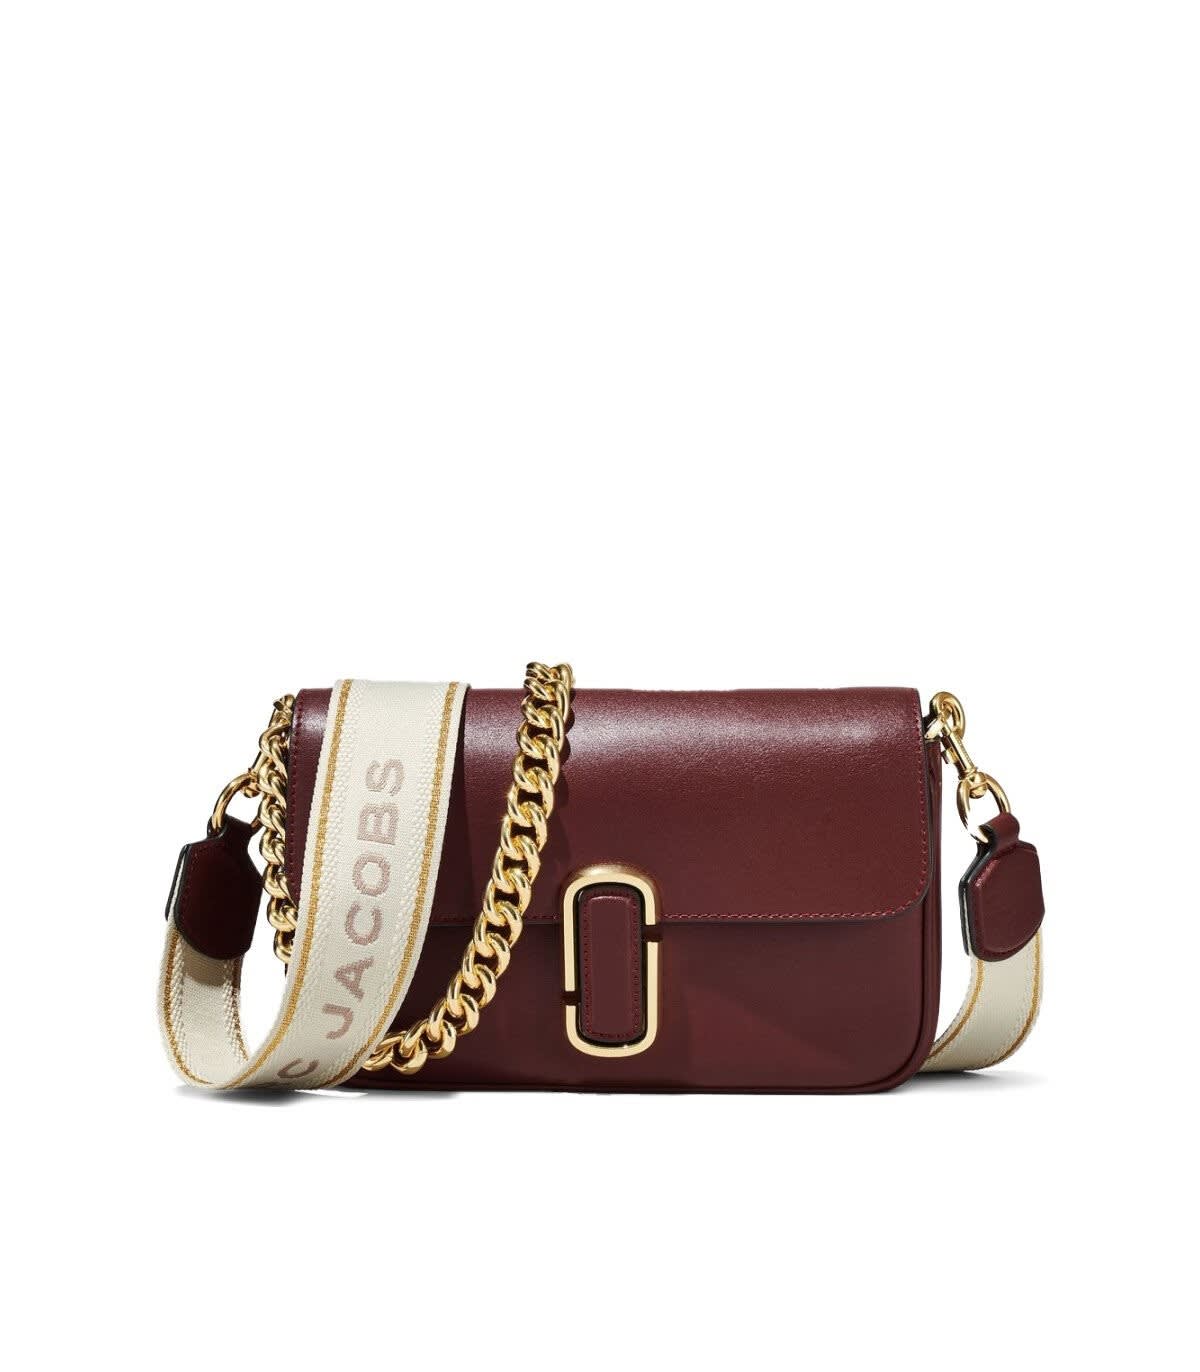 Marc Jacobs, Bags, Marc Jacobs Leather The Tote Bag Mini Chianti